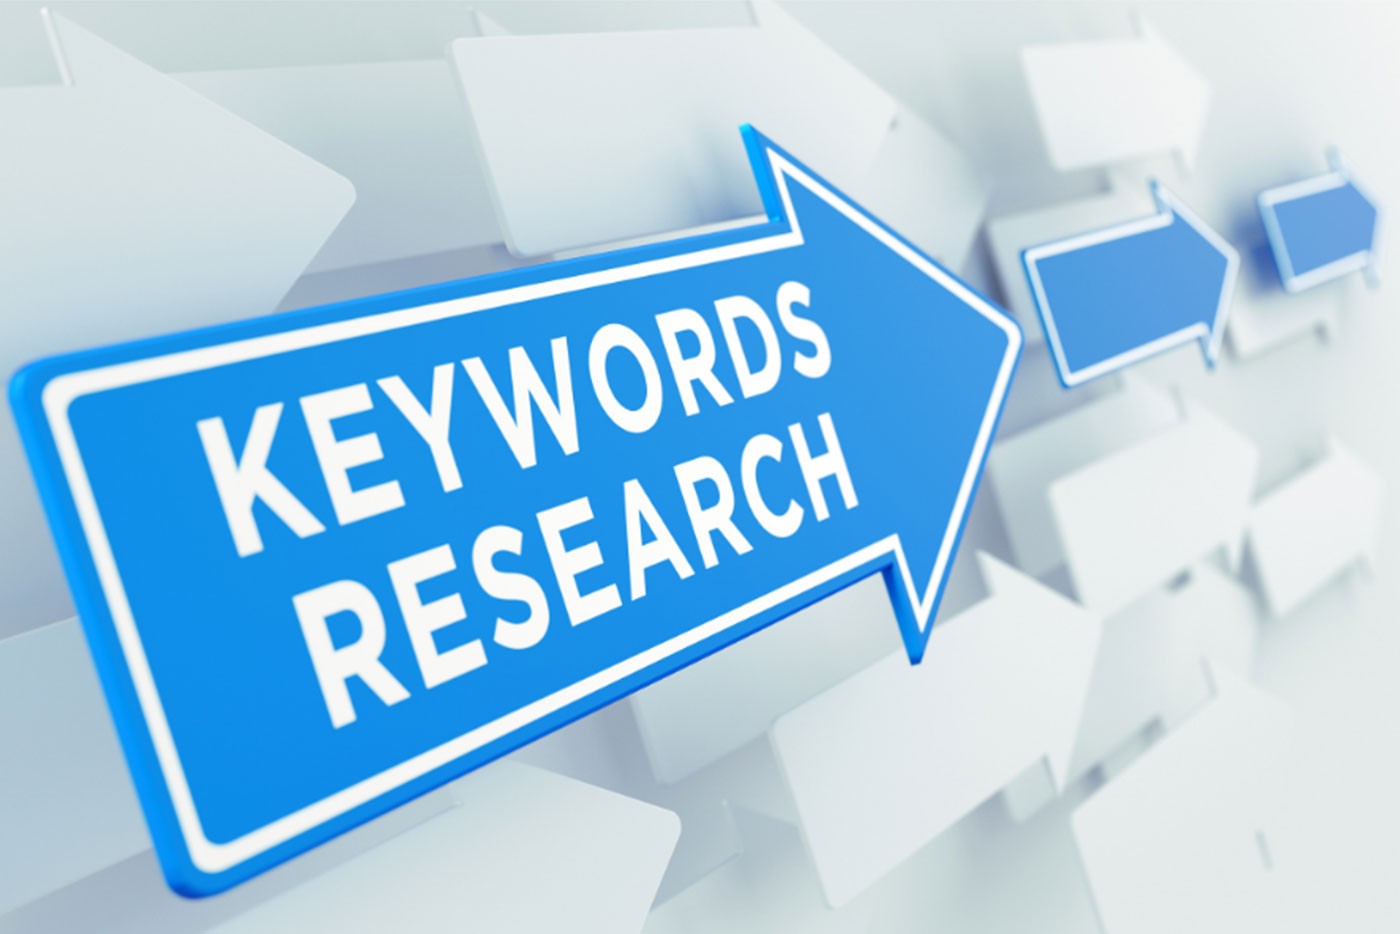 Google: The Ultimate Keyword Research Tool